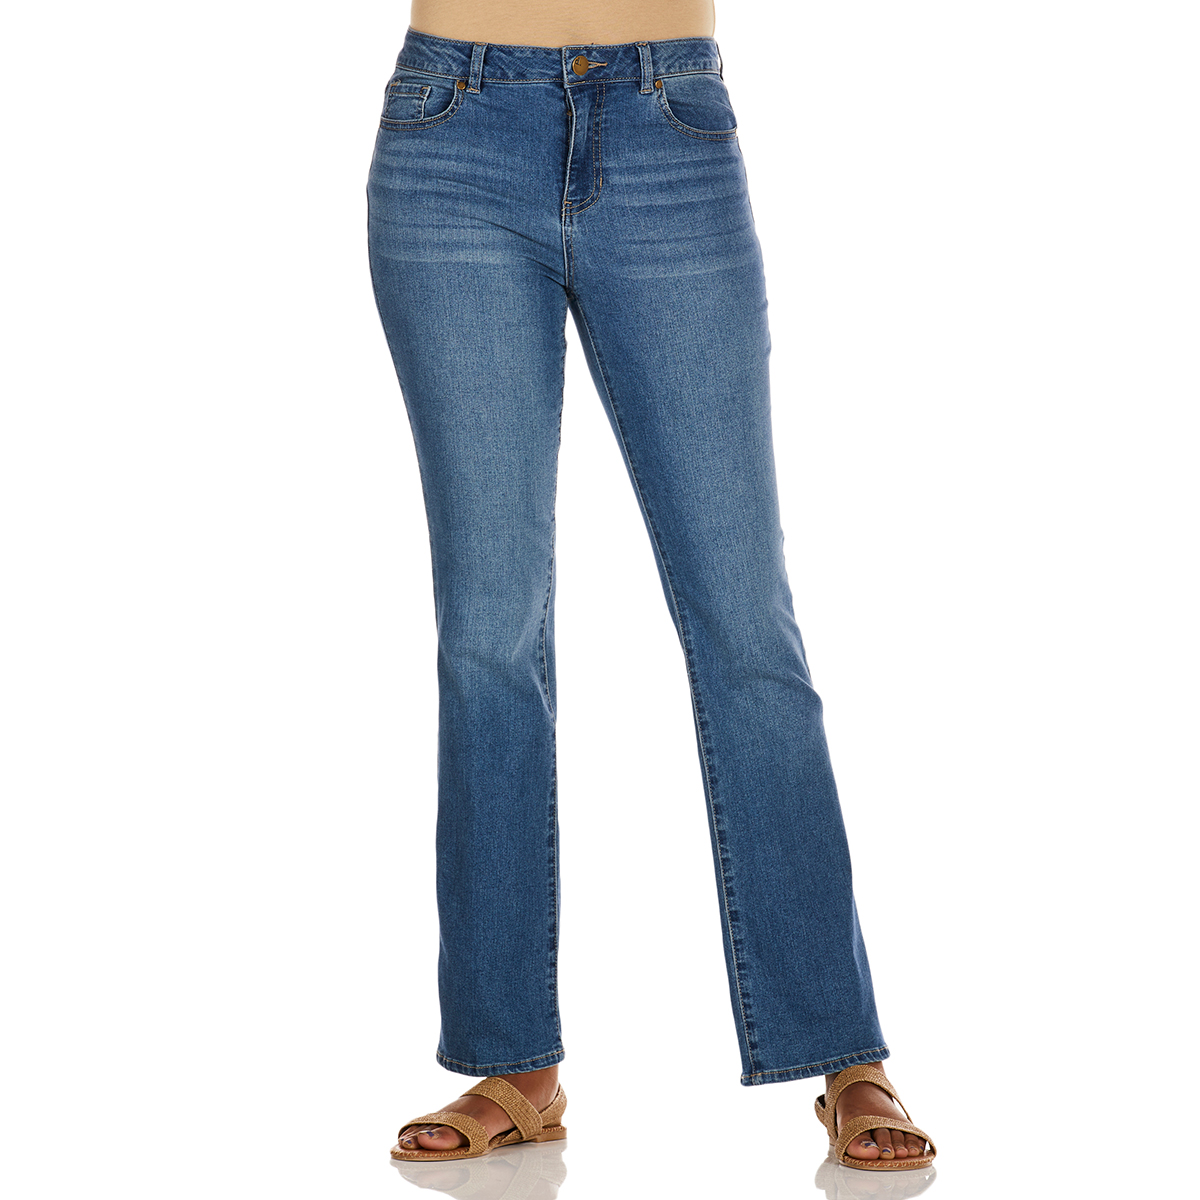 D Jeans Women's High-Waisted Skinny Boot Jeans W/ Front Center Crease